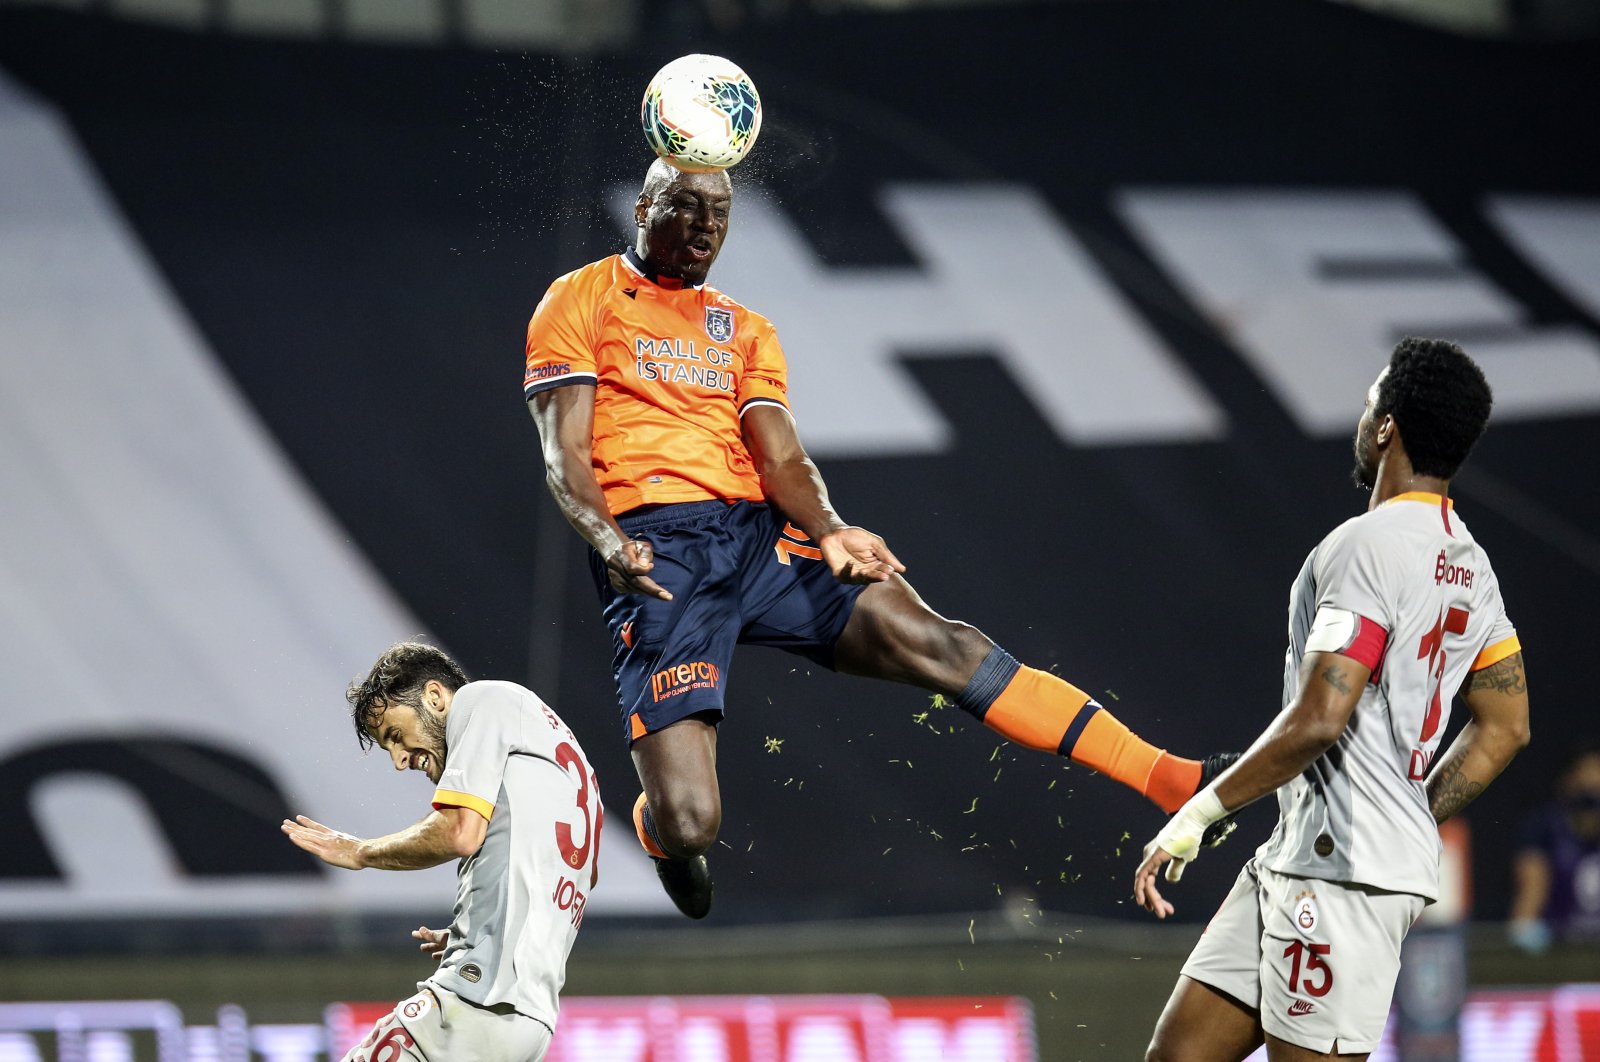 Başakşehir's Demba Ba (C) confronts Galatasaray's Ryan Donk (R) and Marcelo Saracchi (L) during the match in Istanbul, Turkey, June 28, 2020. (AA Photo) 